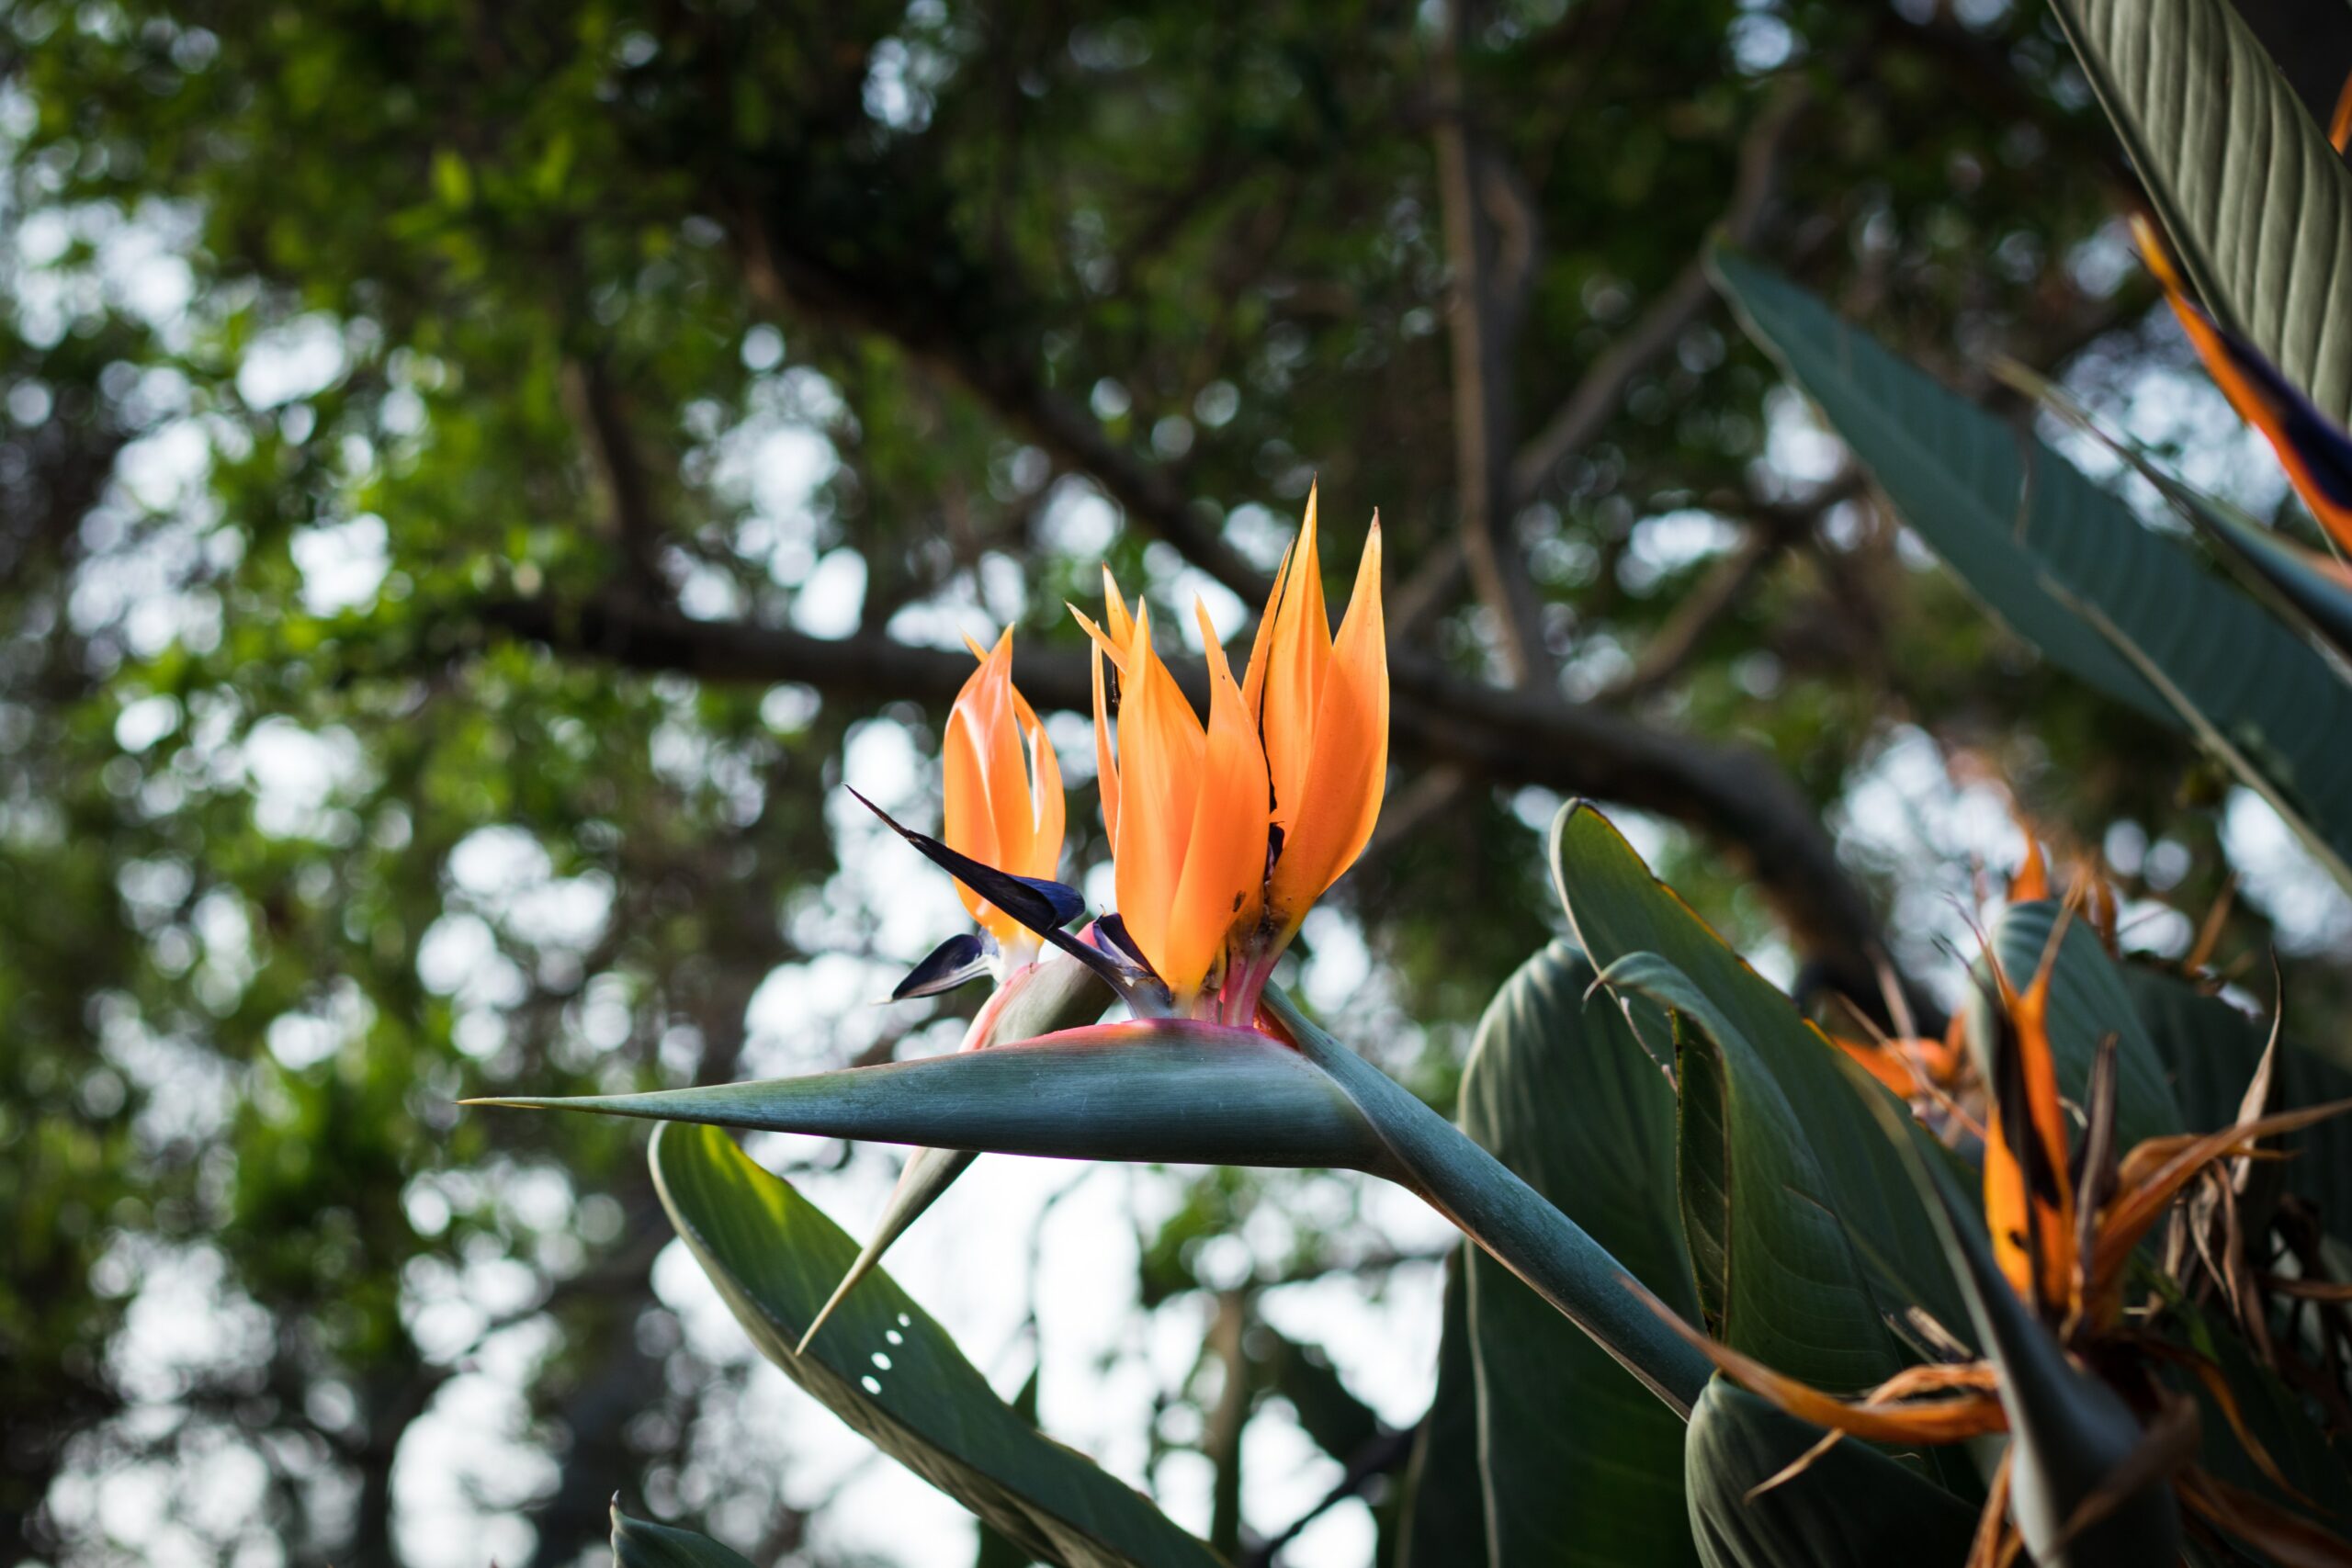 A birds of paradise plant is shown here, a must-try tropical plant for your Florida landscape.